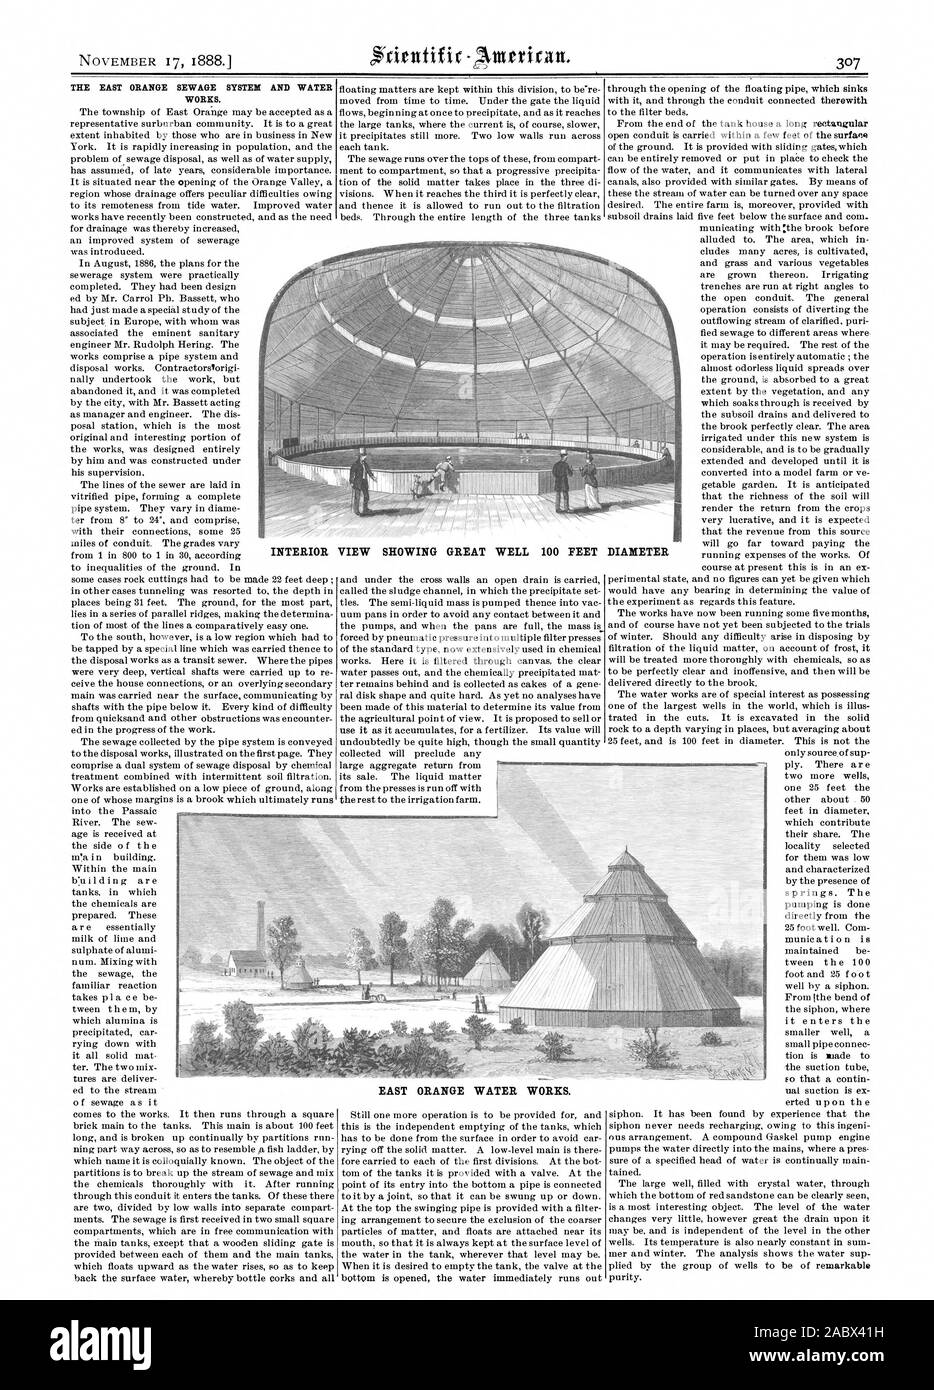 THE EAST ORANGE SEWAGE SYSTEM AND WATER WORKS. EAST ORANGE WATER WORKS. INTERIOR VIEW SHOWING GREAT WELL 100 FEET DIAMETER, scientific american, 1888-11-17 Stock Photo